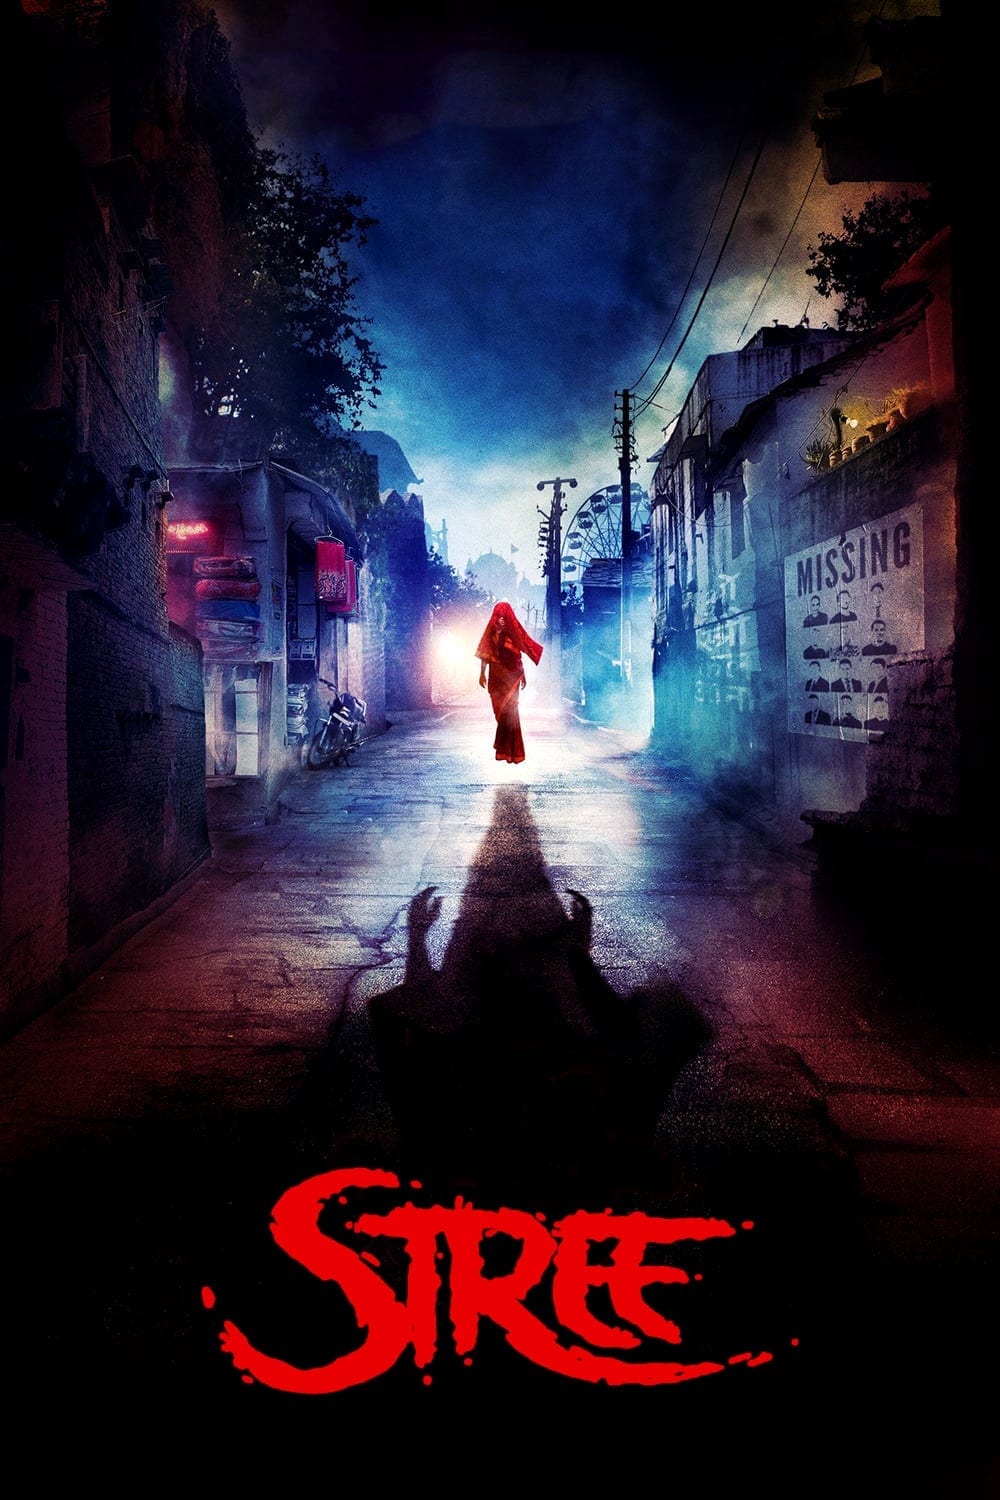 Poster for the movie "Stree"